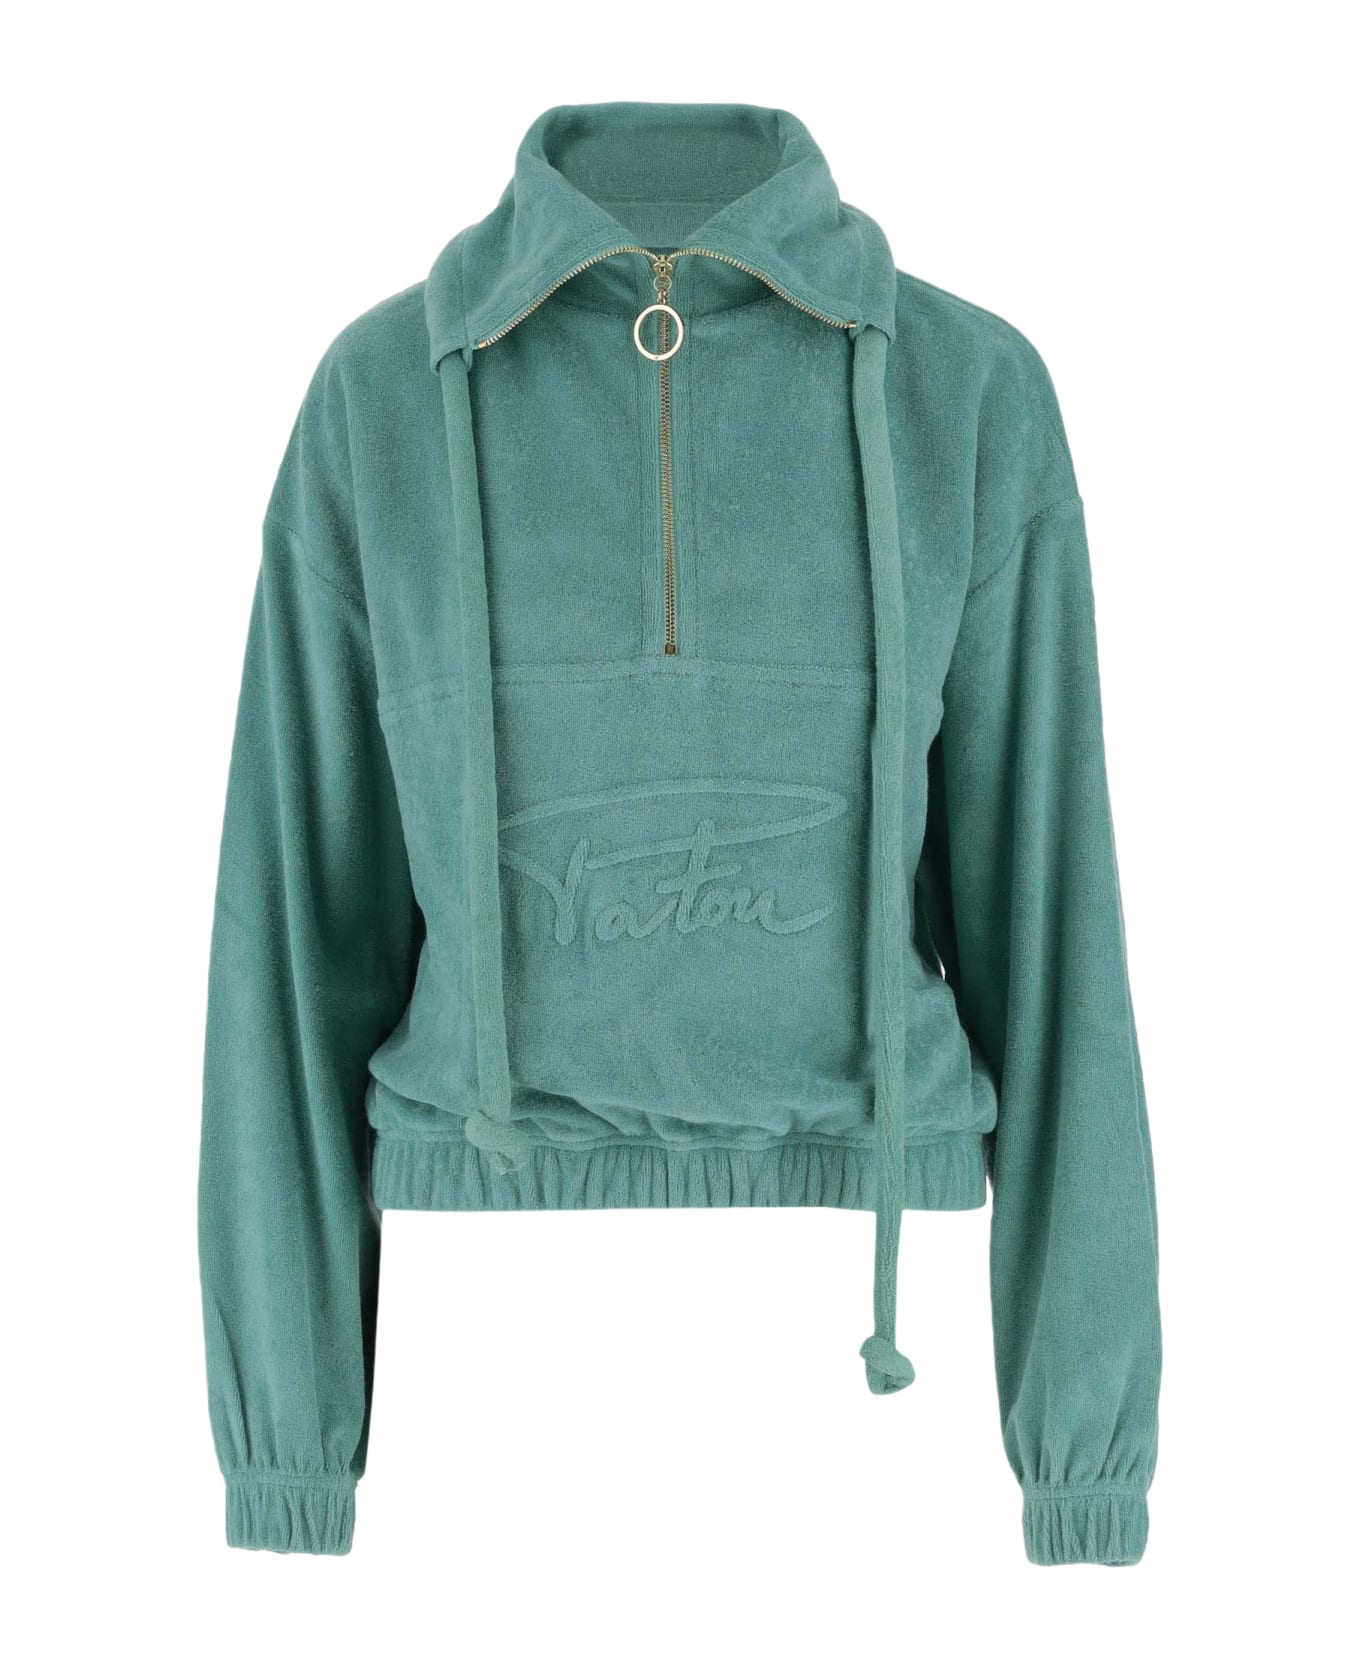 Patou Cotton Sweatshirt With Embossed Patou Signature - Green